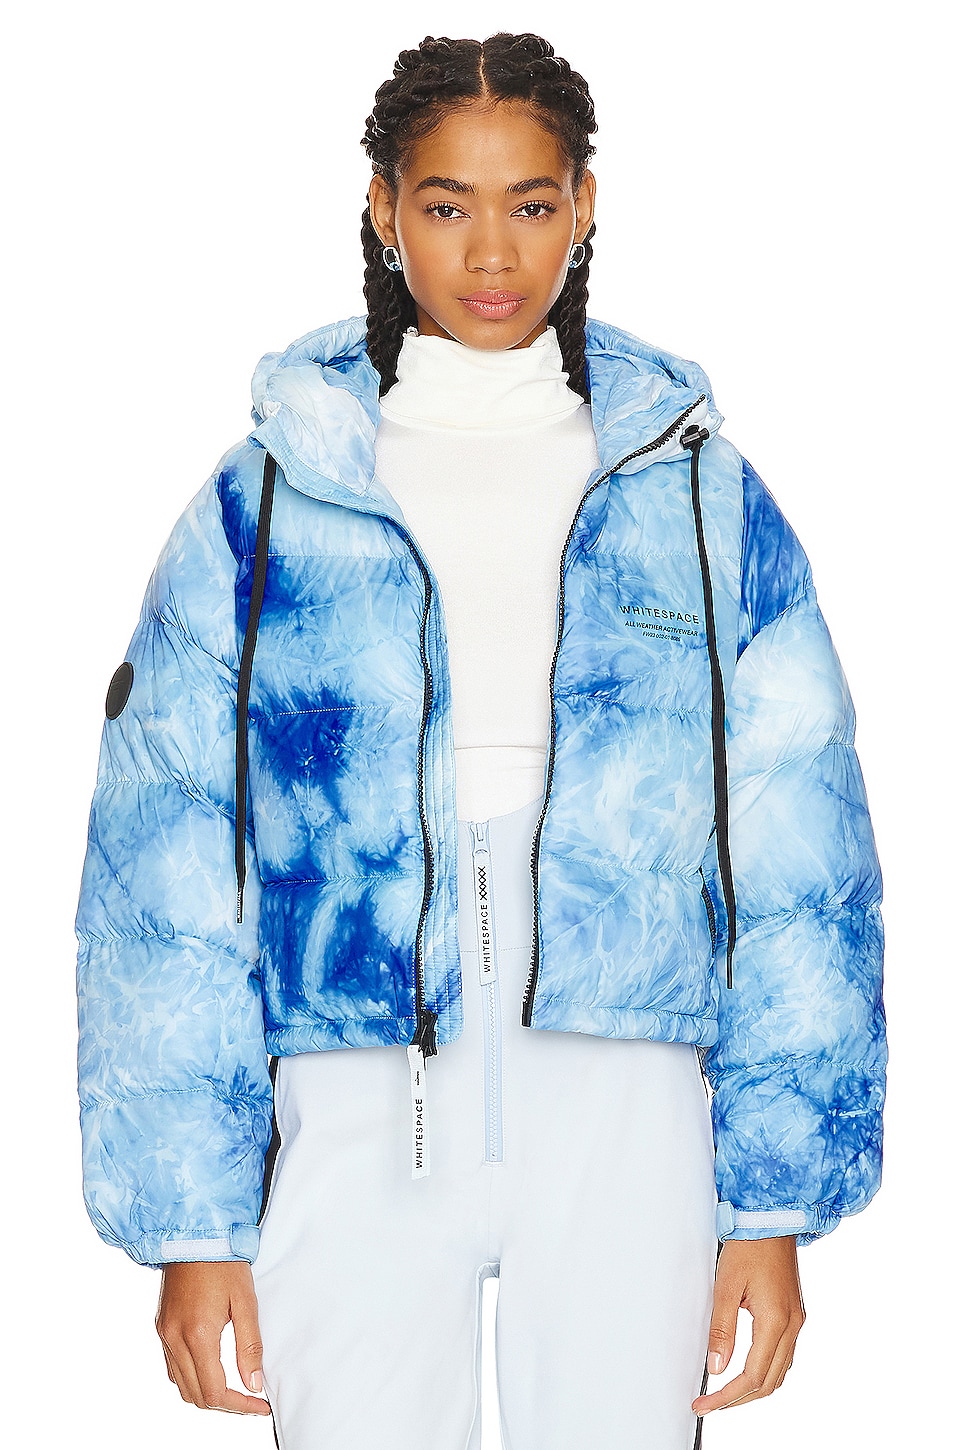 Whitespace Cropped Puffer Jacket in Ice Blue & White